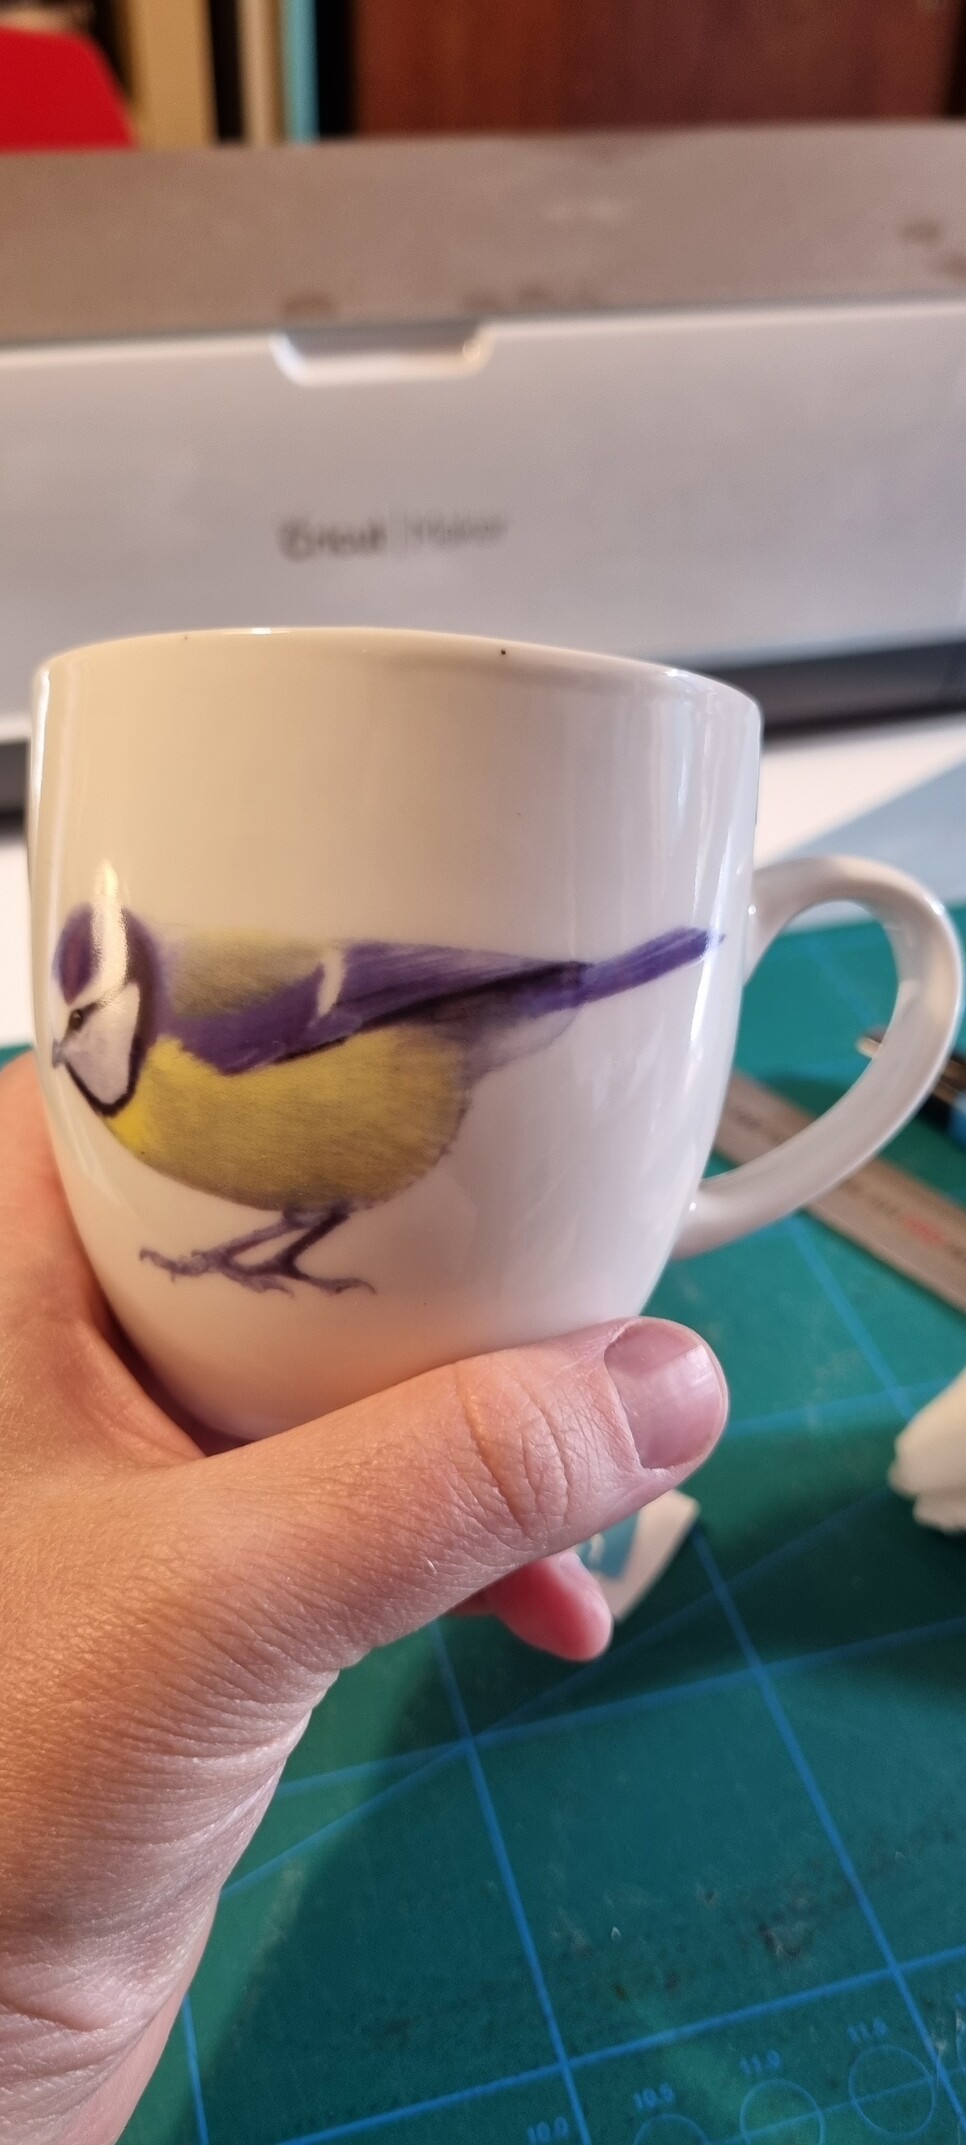 My hand holding a round cup with a picture of a blue tit on it. In the background you can see an out of focus cricut machine